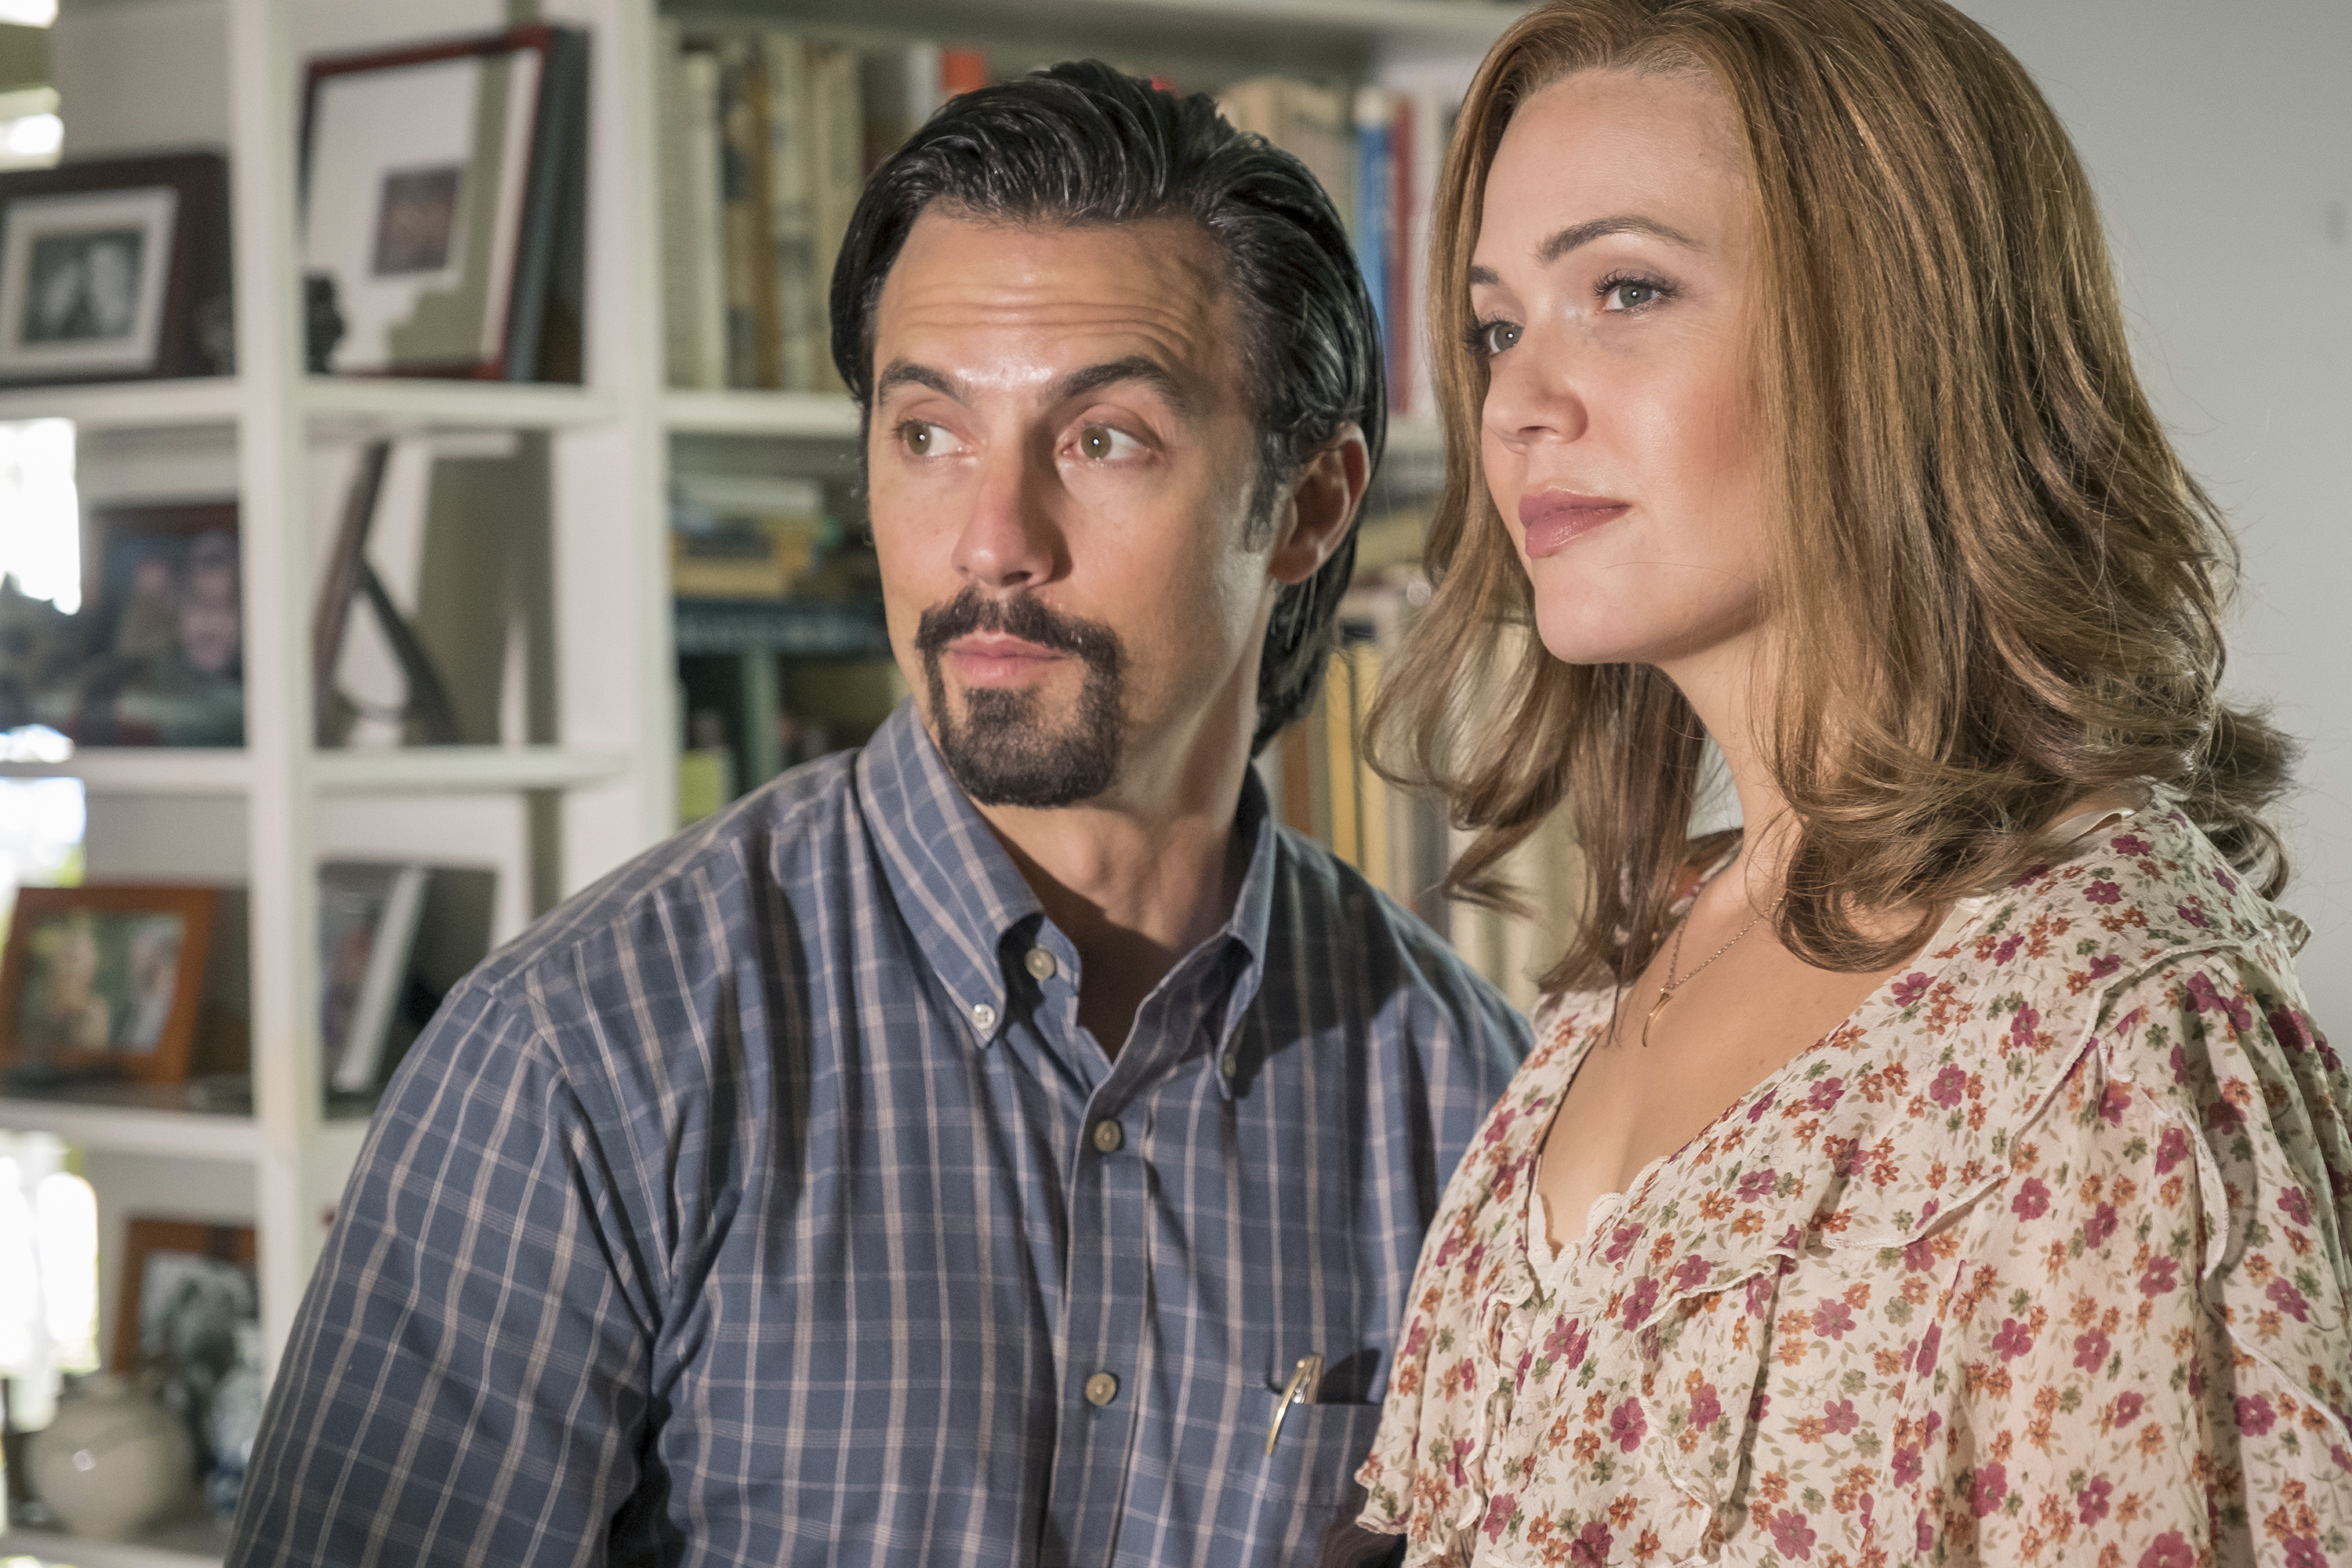 'This Is Us' stars Milo Ventimiglia and Mandy Moore, in character as Jack and Rebecca, stand side-by-side. Ventimiglia wears a blue plaid long-sleeved button-up shirt. Moore wears a white dress with pink and orange flowers on it. Both actors have appeared in 'This Is Us' Thanksgiving episodes.